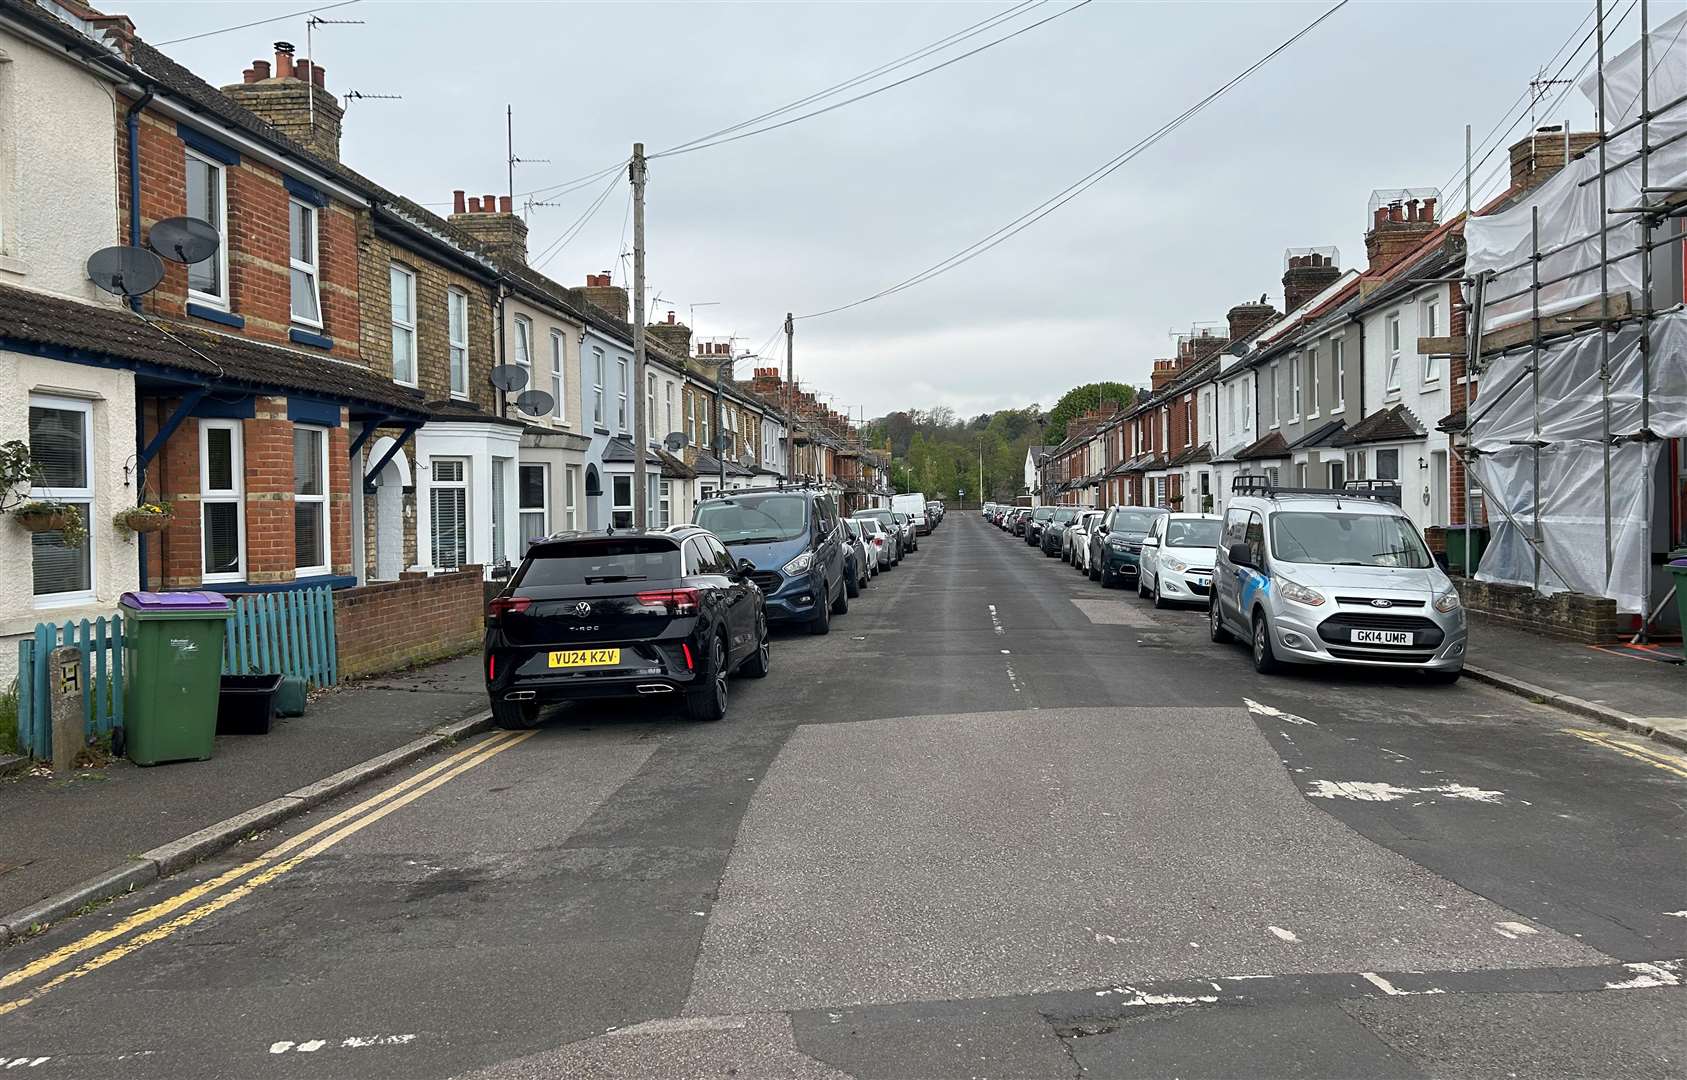 Residents are concerned over traffic congestion on the surrounding roads in Hythe